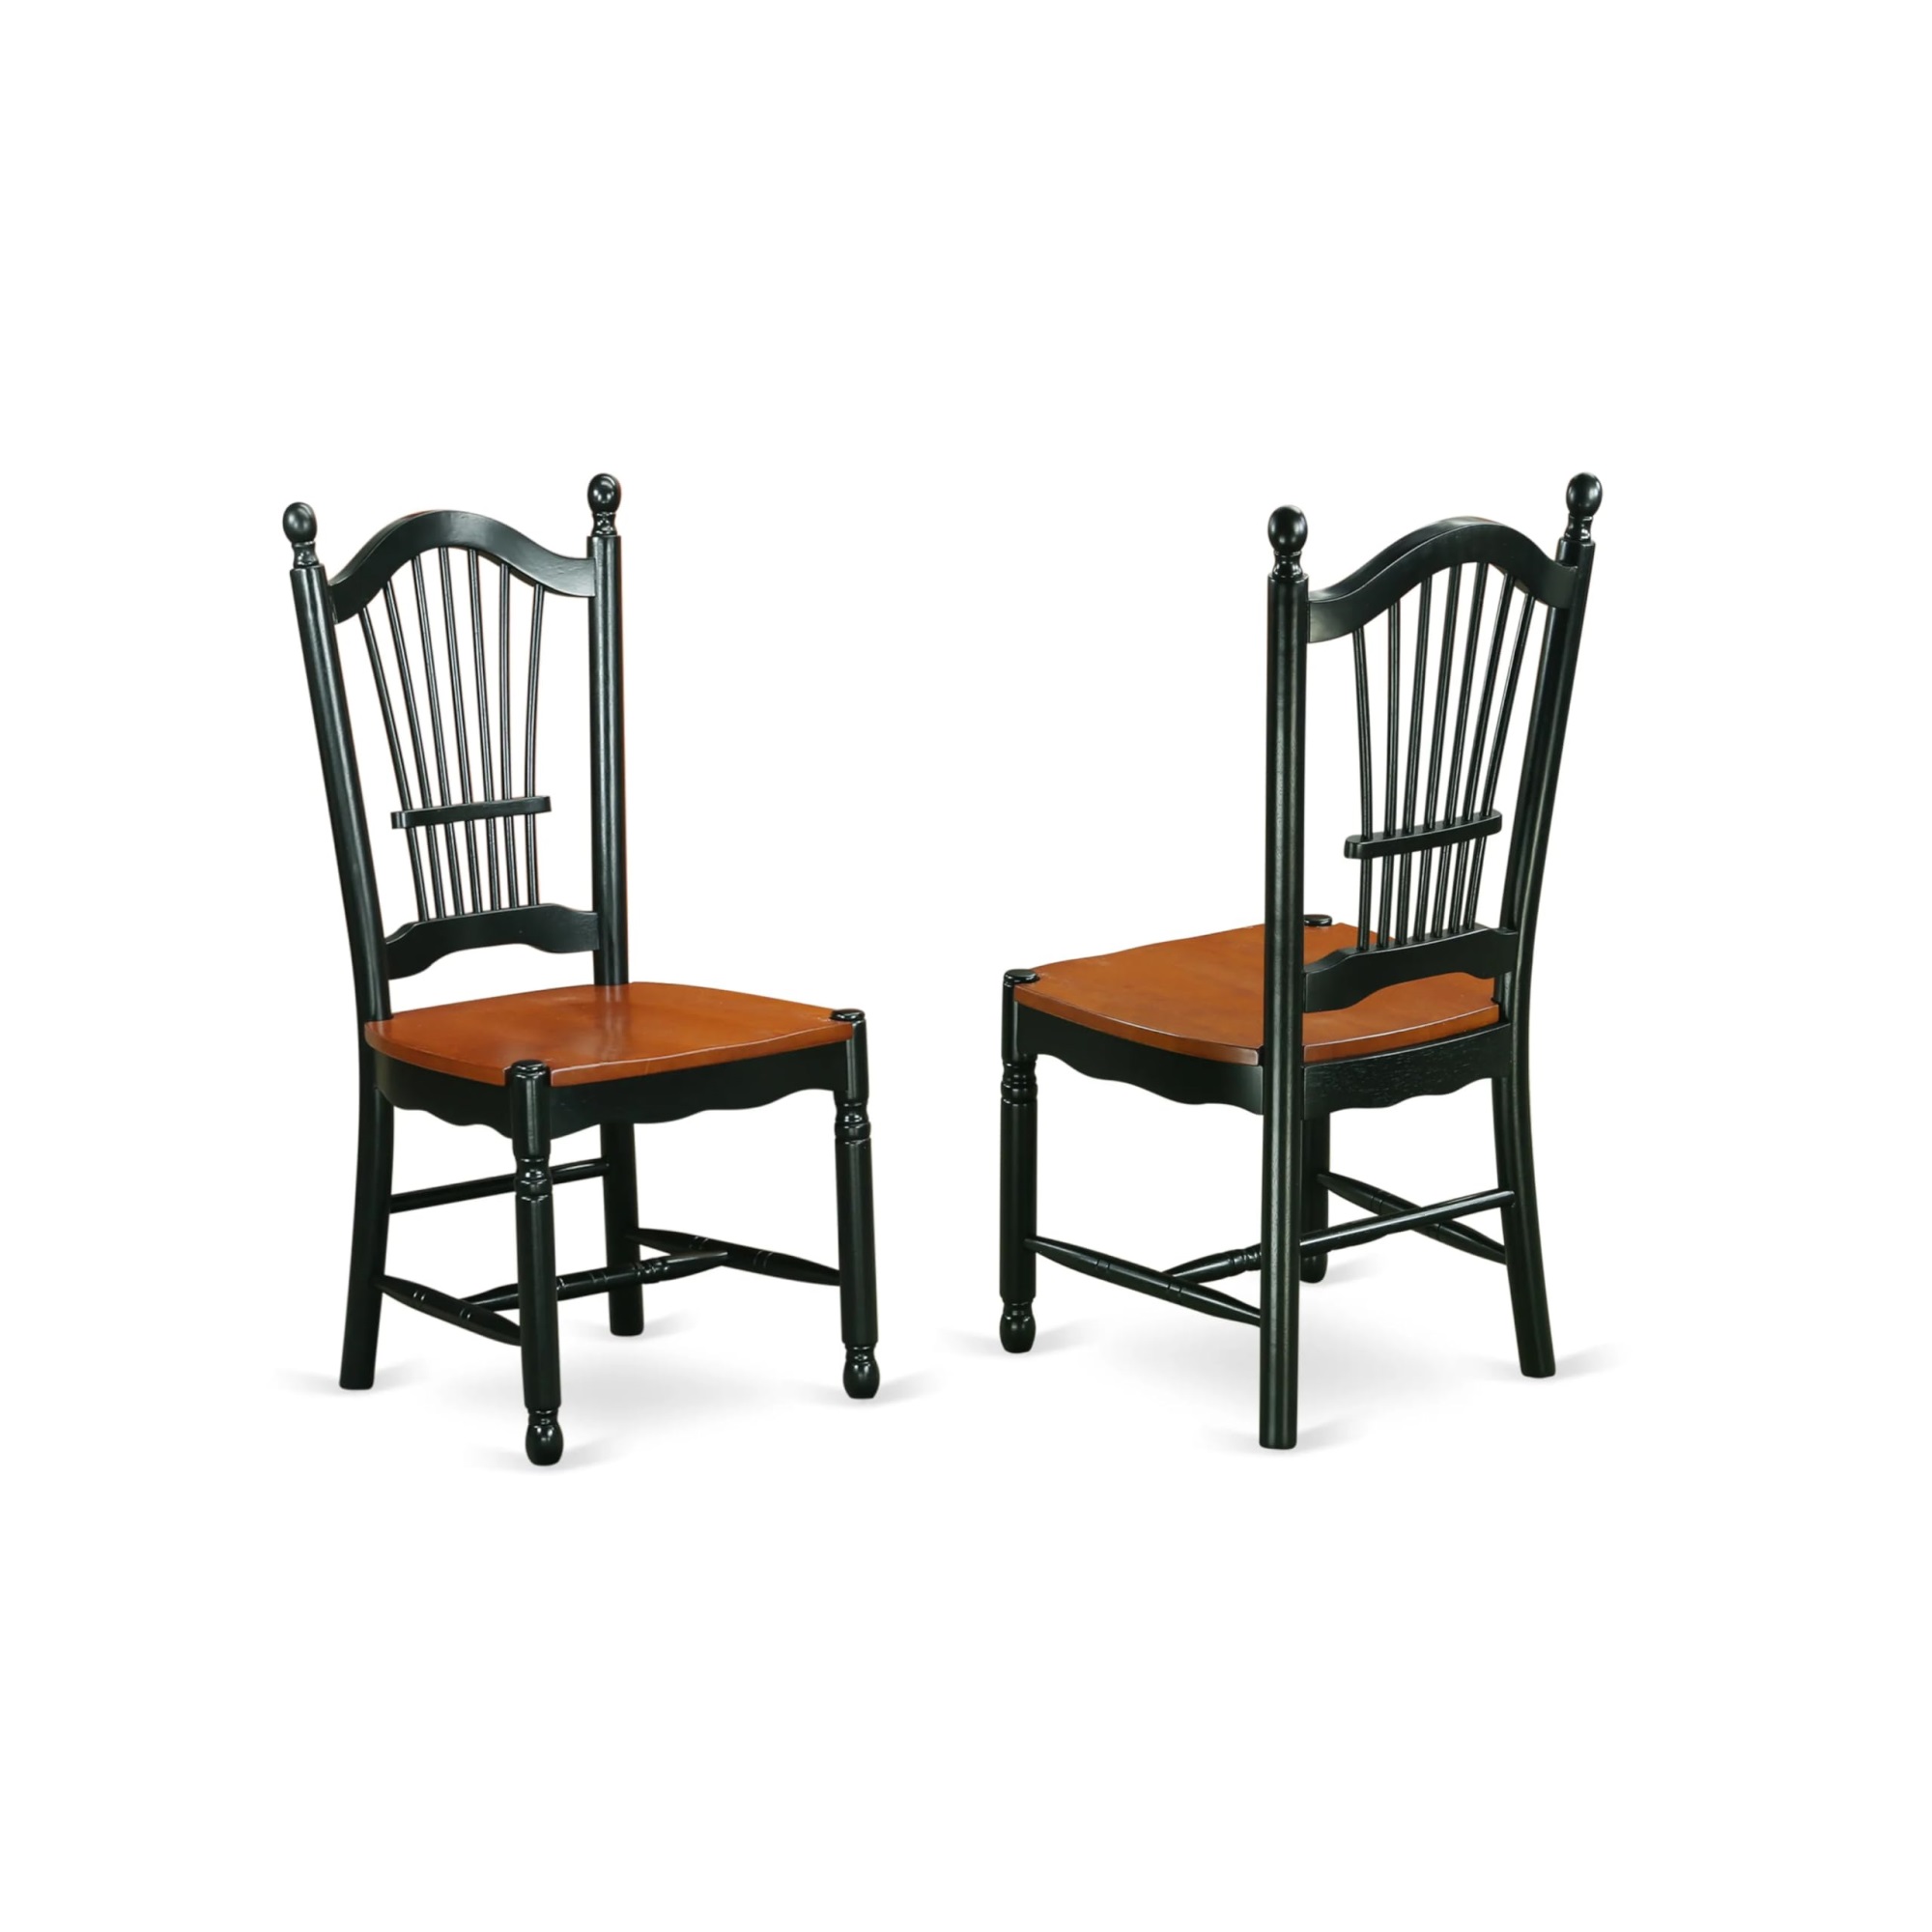 East West Furniture Set of 2 Chairs DOC-BCH-W Dover Dining Room Chairs With Wood Seat - Finished in Black and Cherry